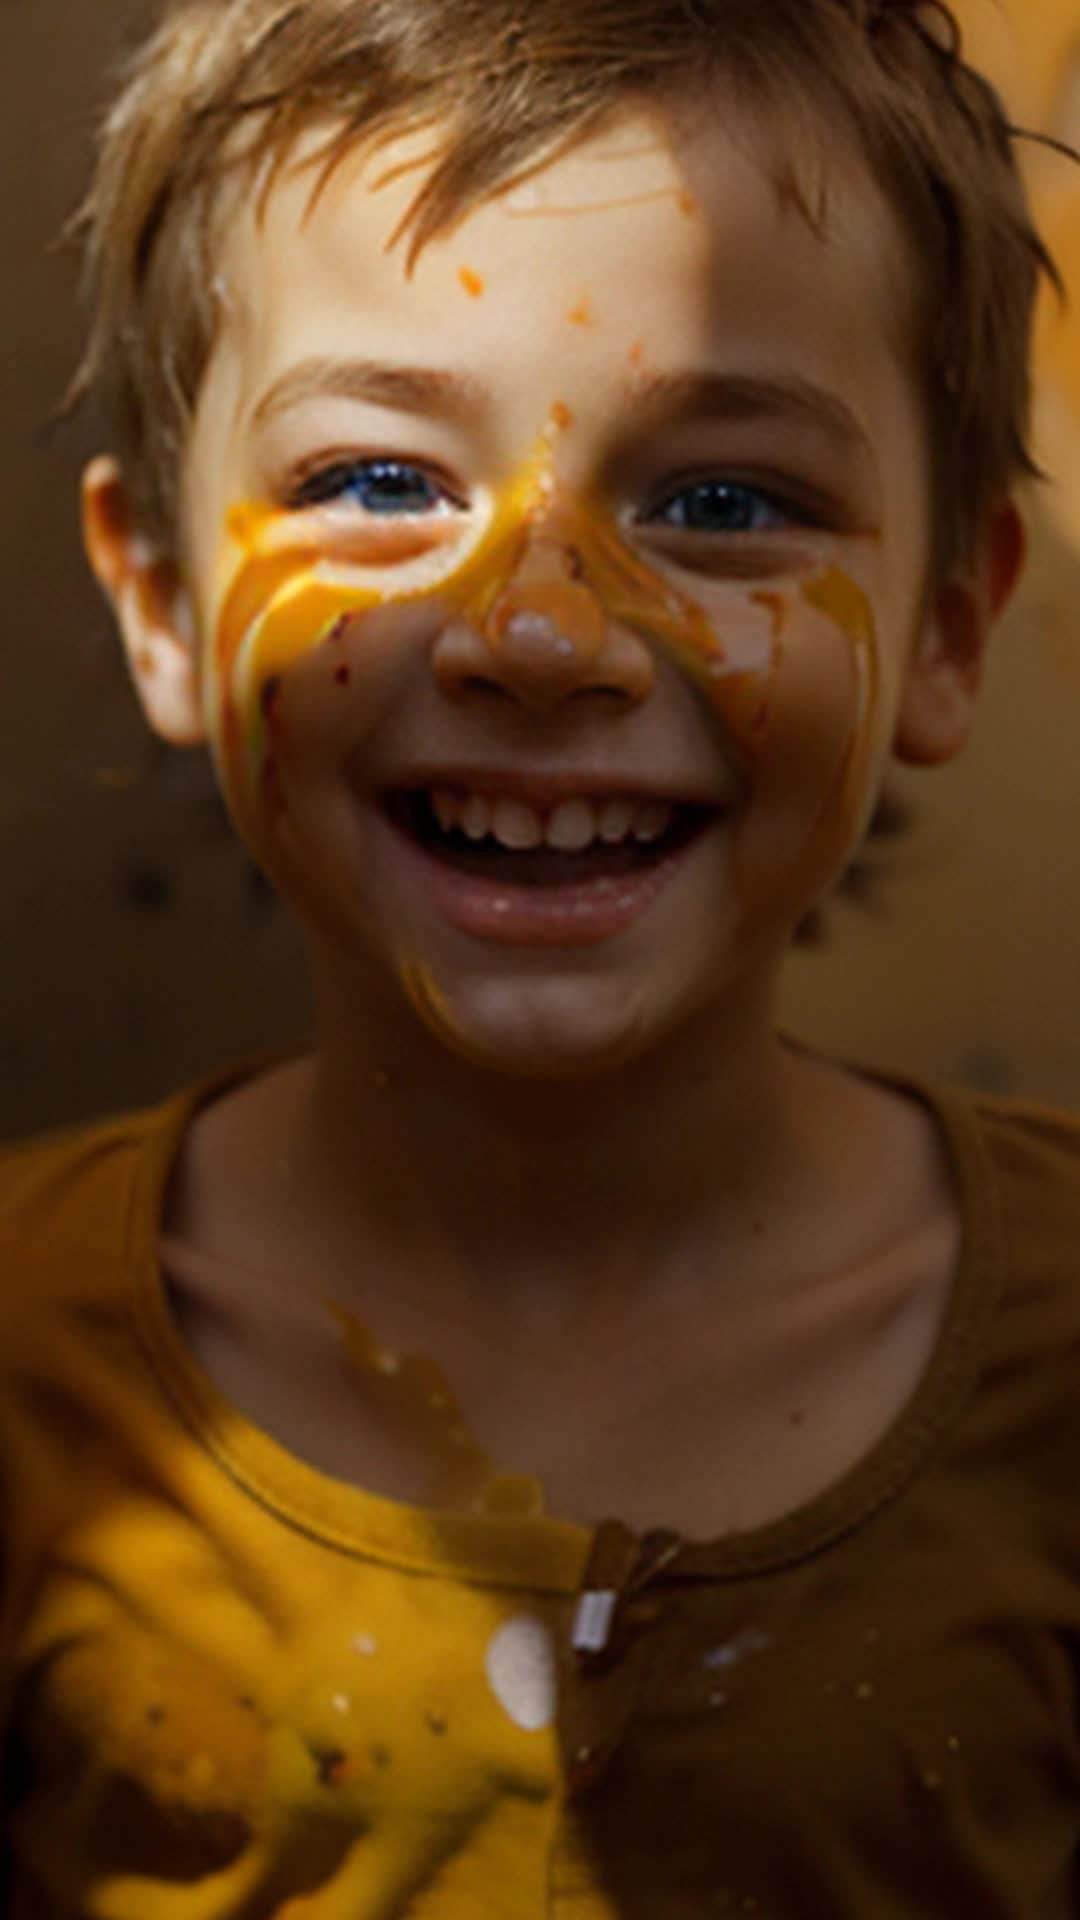 Playful child flicks orange paint at another, laughter echoing, eyes sparkling with mischief, soft shadows, high resolution